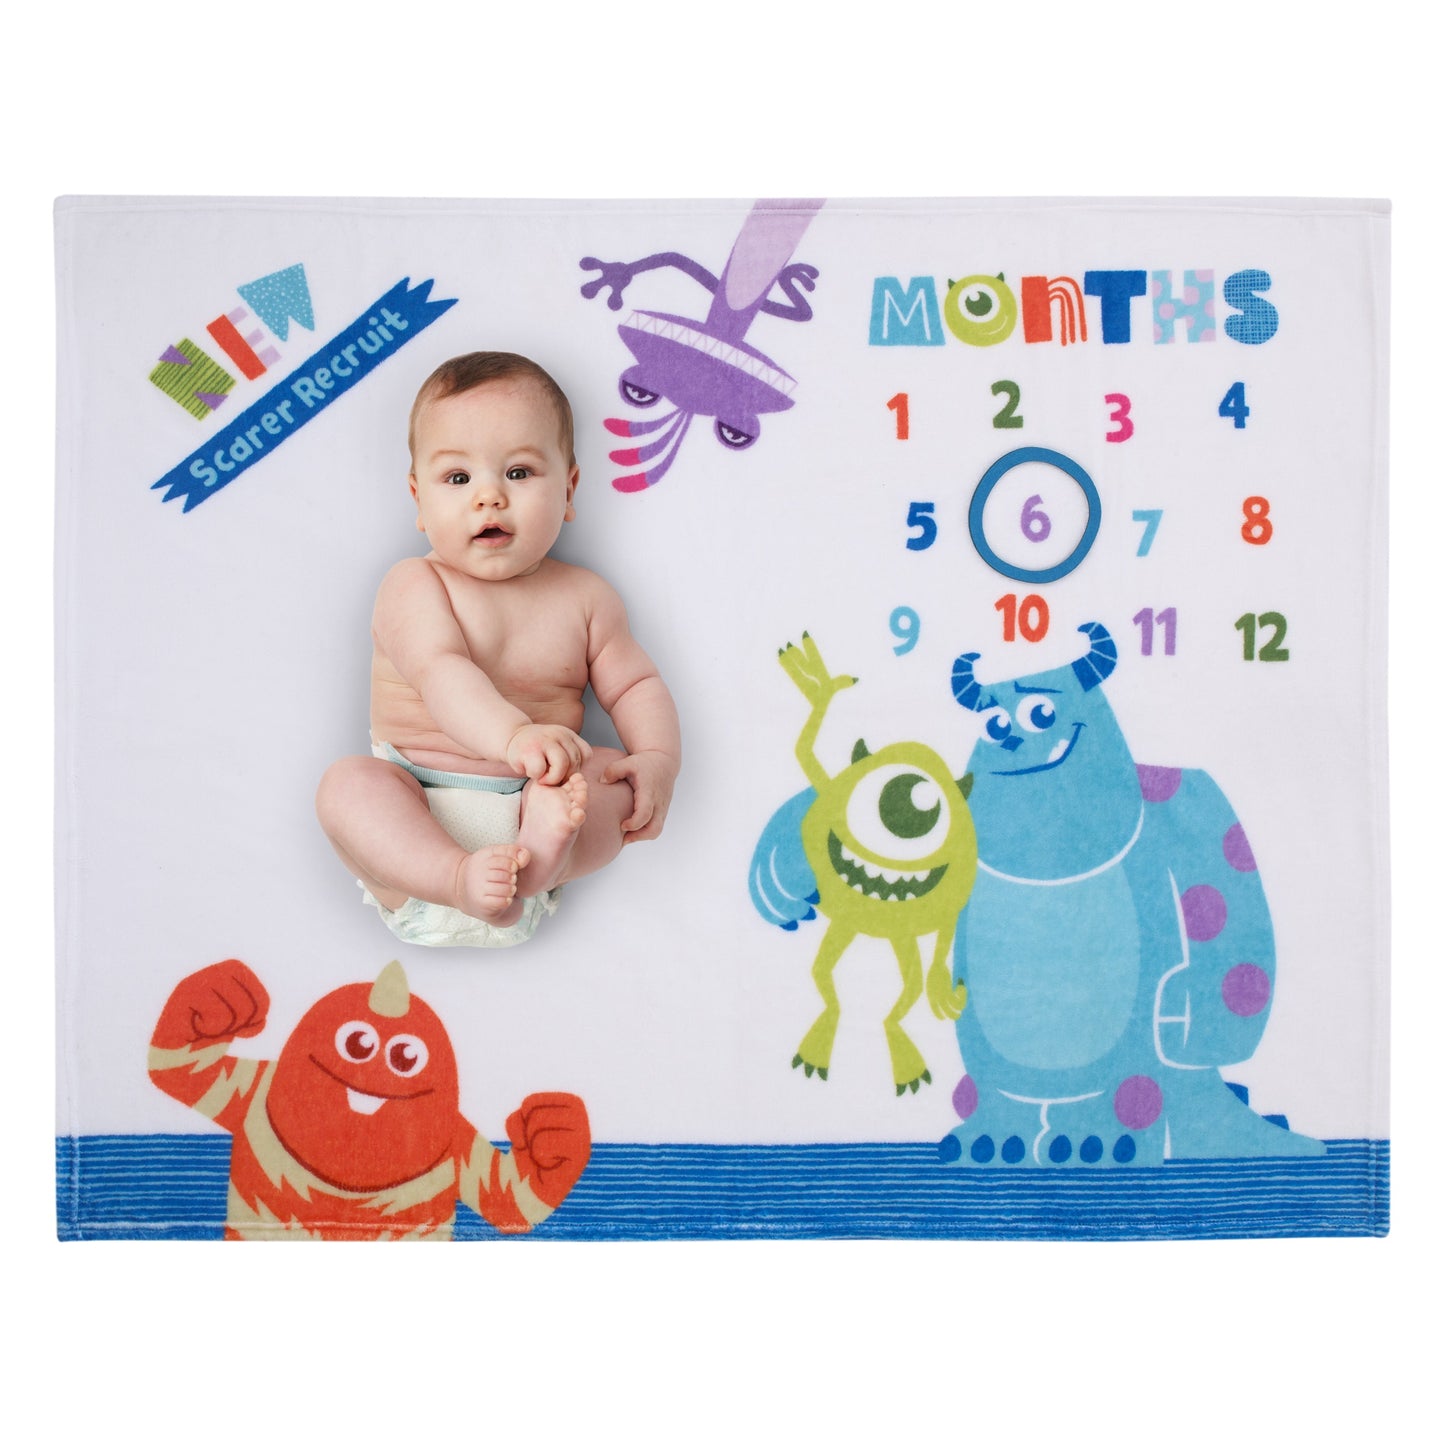 Disney Monsters, Inc. White, Blue, and Green, New Scarer Recruit Super Soft Photo Op Milestone Baby Blanket